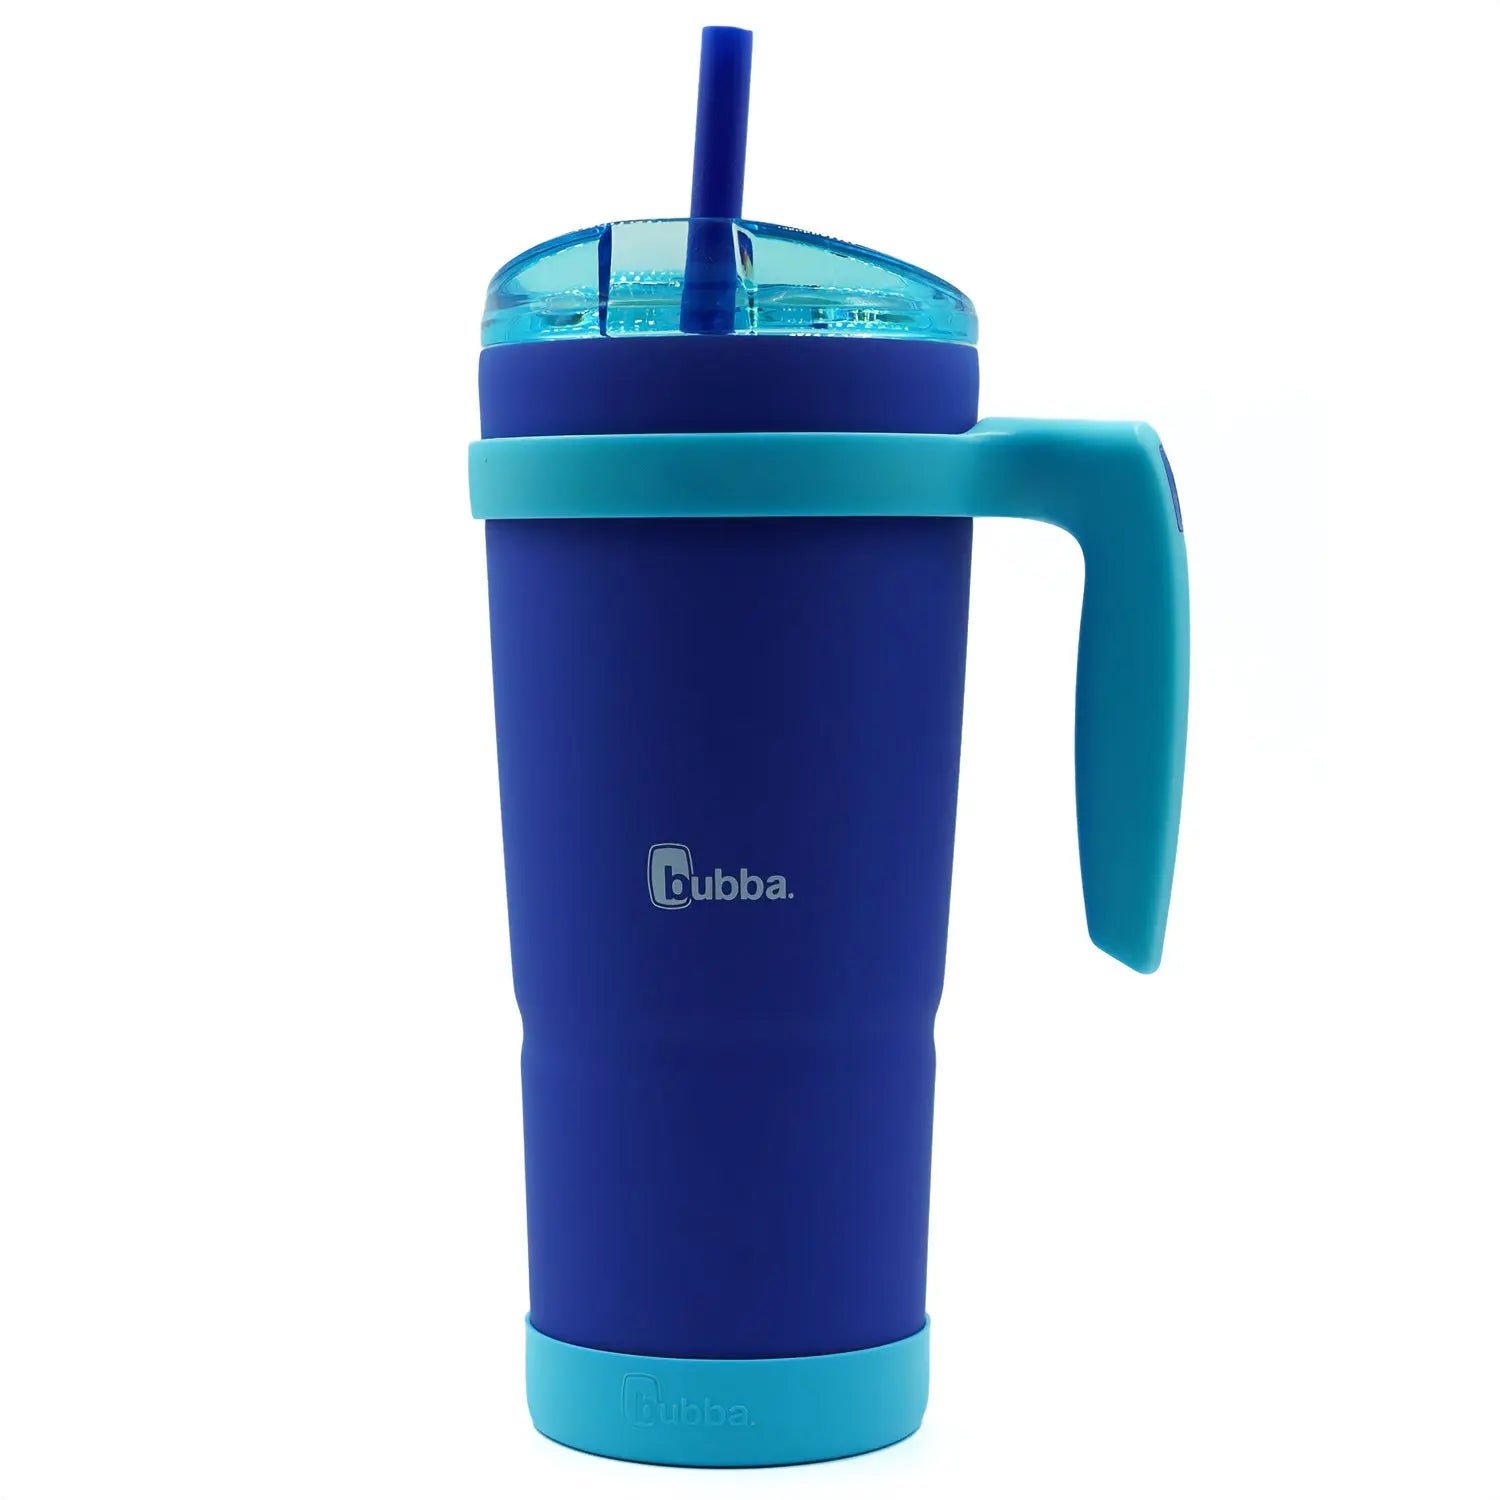 Bubba 32 oz. Envy Vacuum Insulated Stainless Steel Rubberized Tumbler Bubba